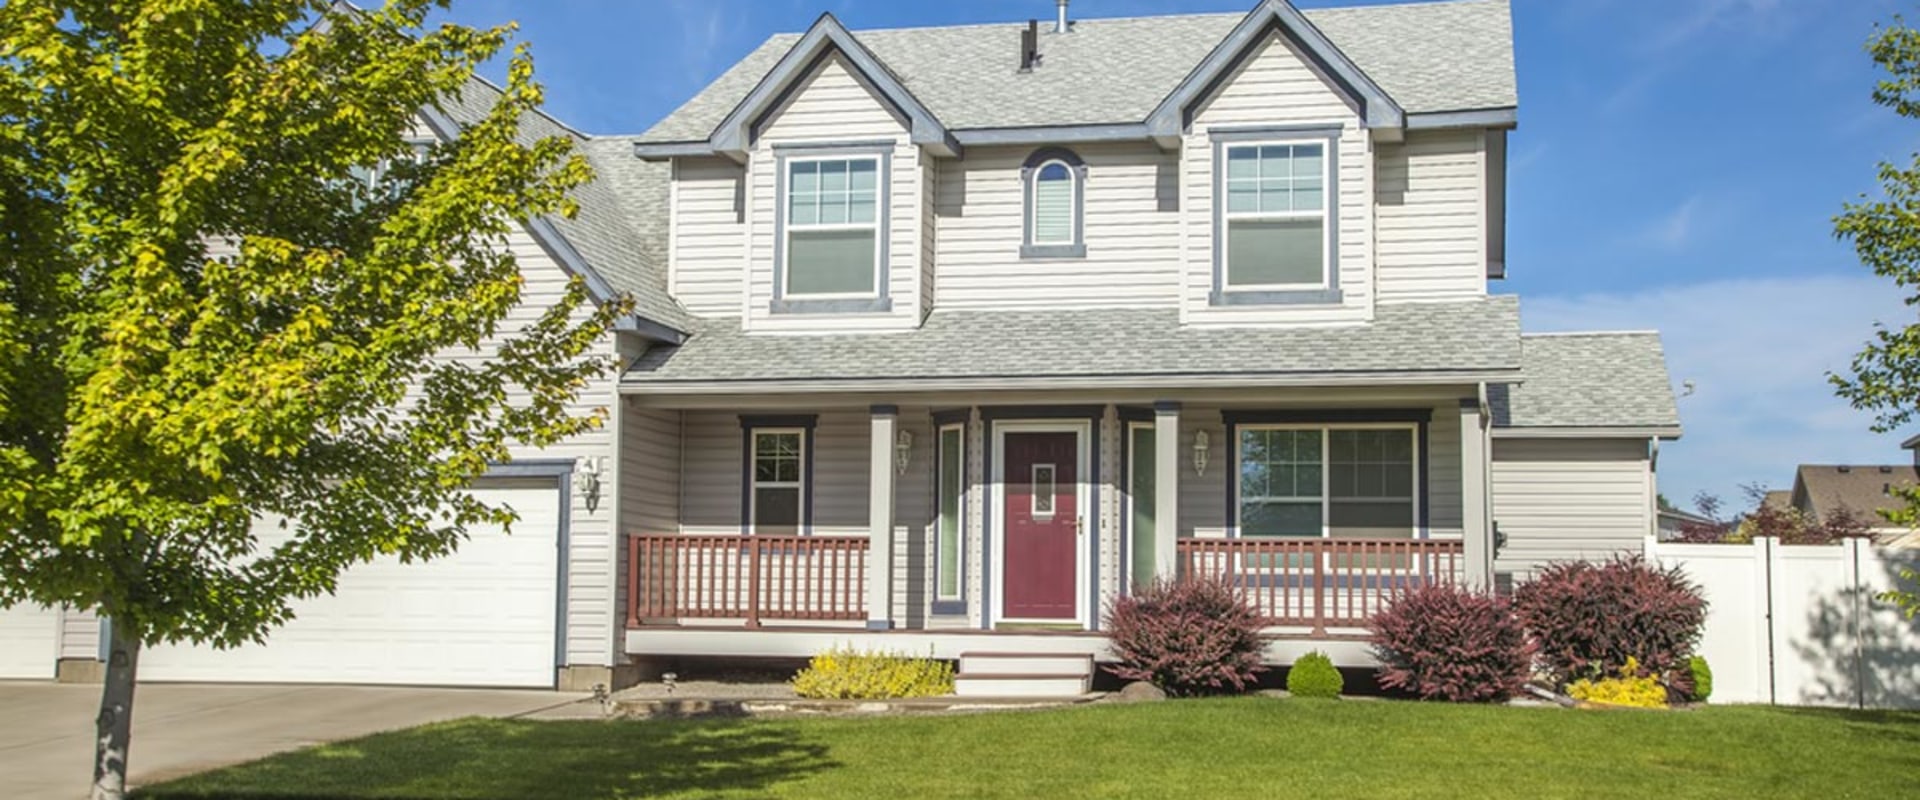 How much would it cost to put vinyl siding on a 3000 square foot house?